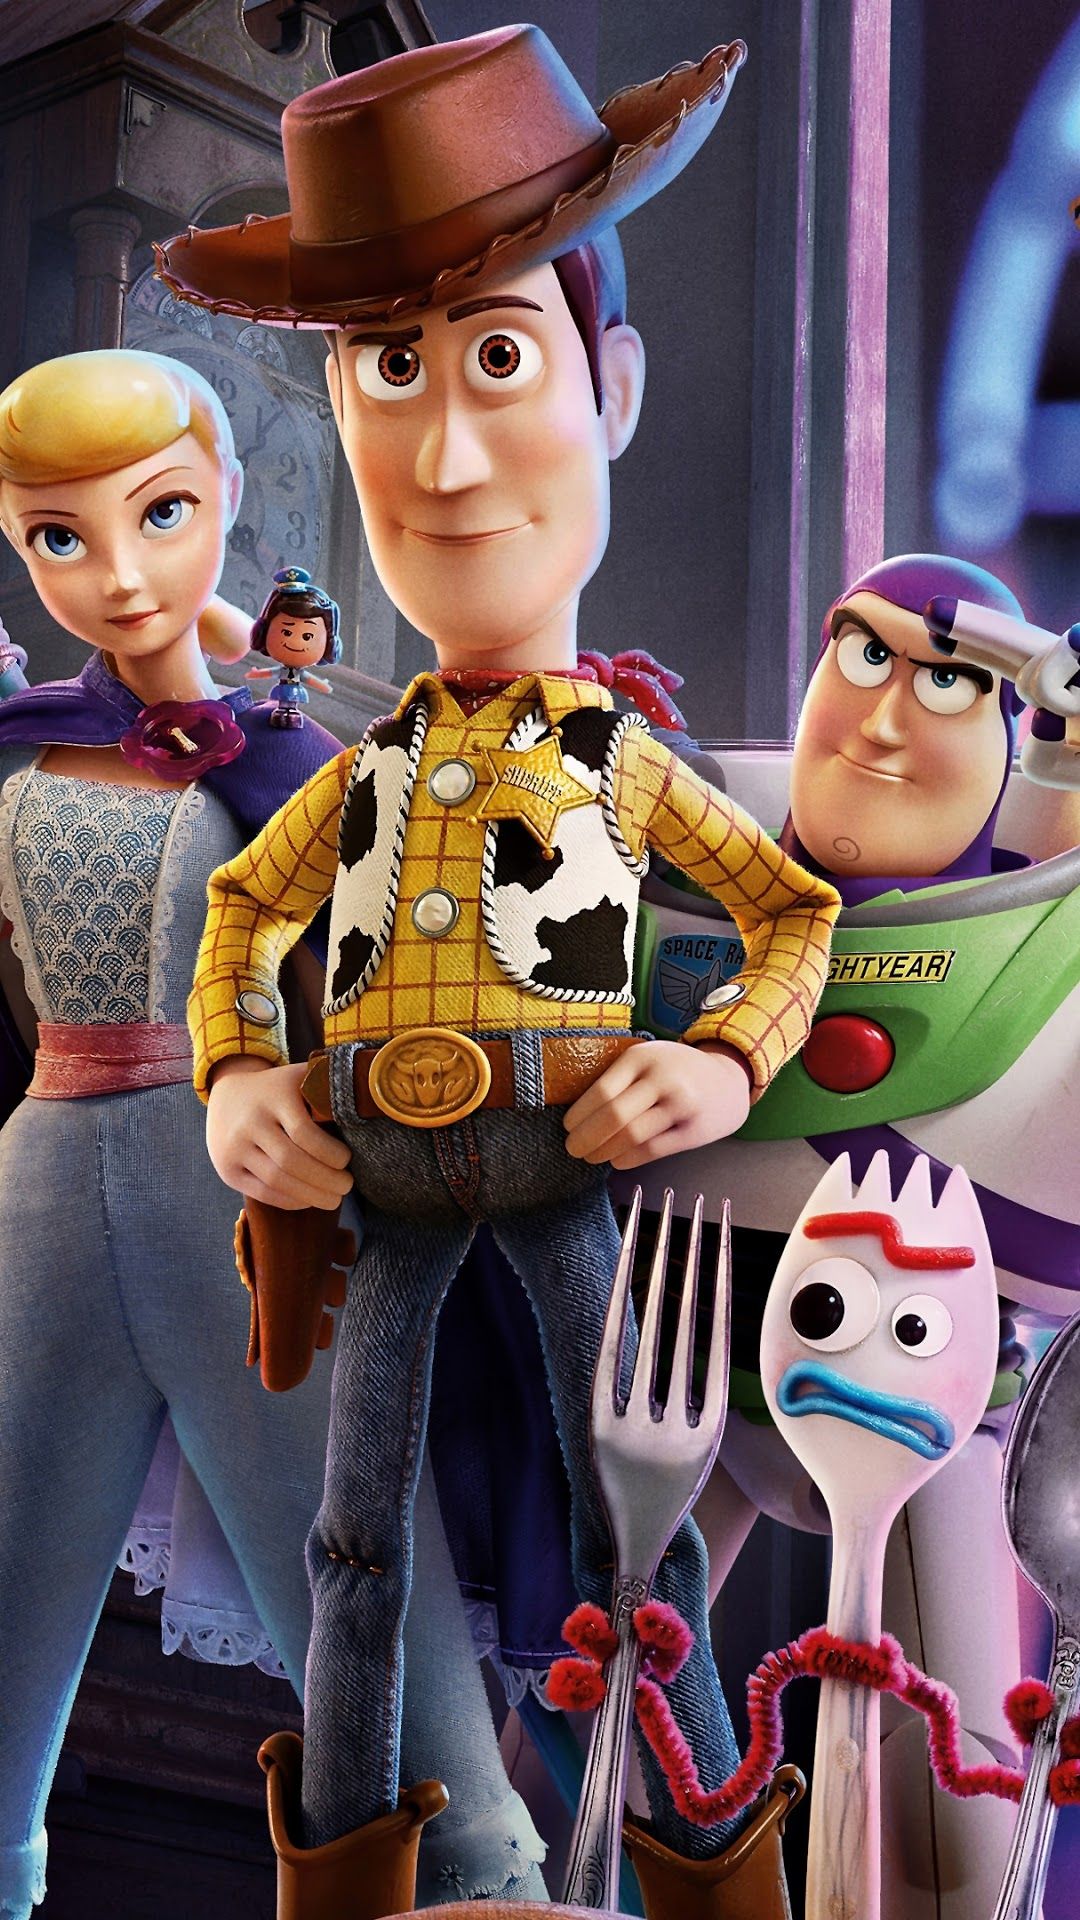 Toy Story Characters, Woody, Buzz Lightyear, Bo Peep phone HD Wallpaper, Image, Background, Photo and Picture HD Wallpaper